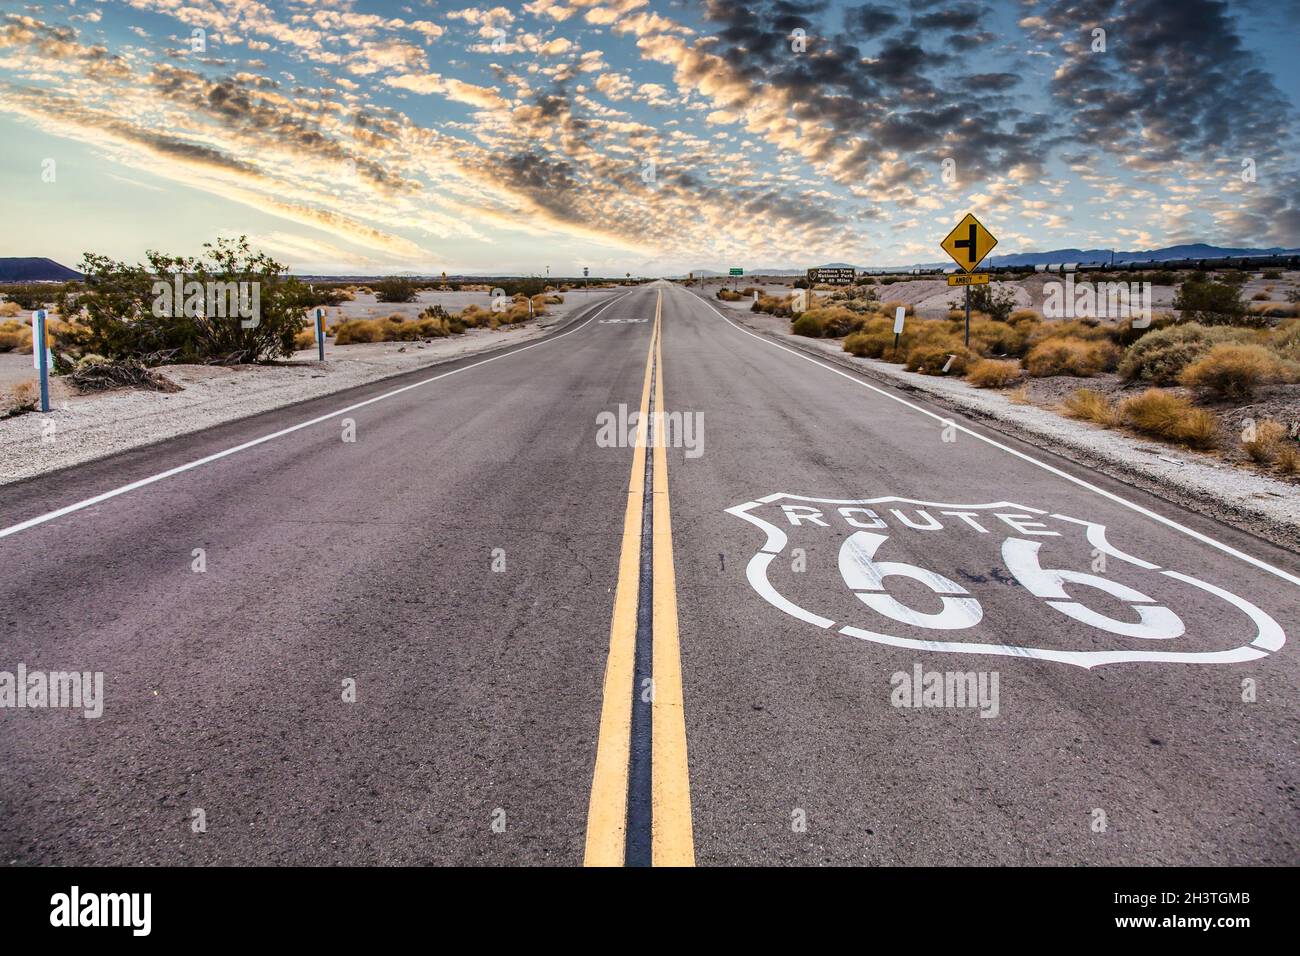 Route 66 in the desert with scenic sky. Classic vintage image with nobody in the frame. Stock Photo